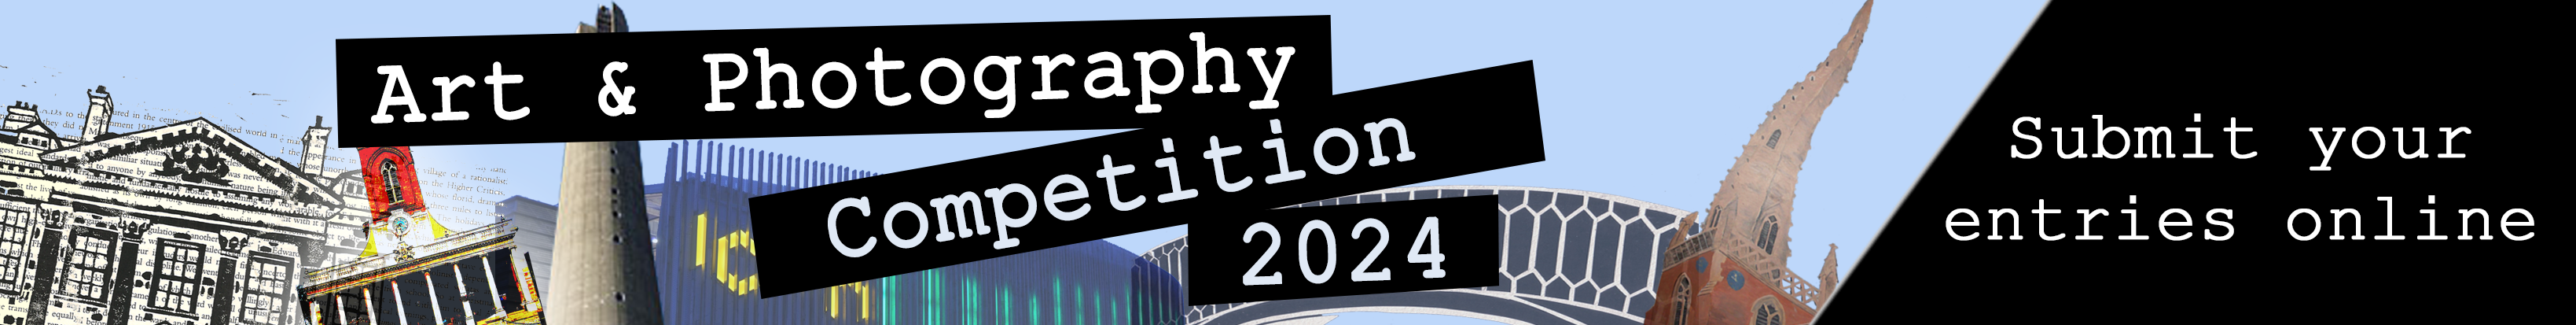 Art and photography competition 2024 - Submit your entries online